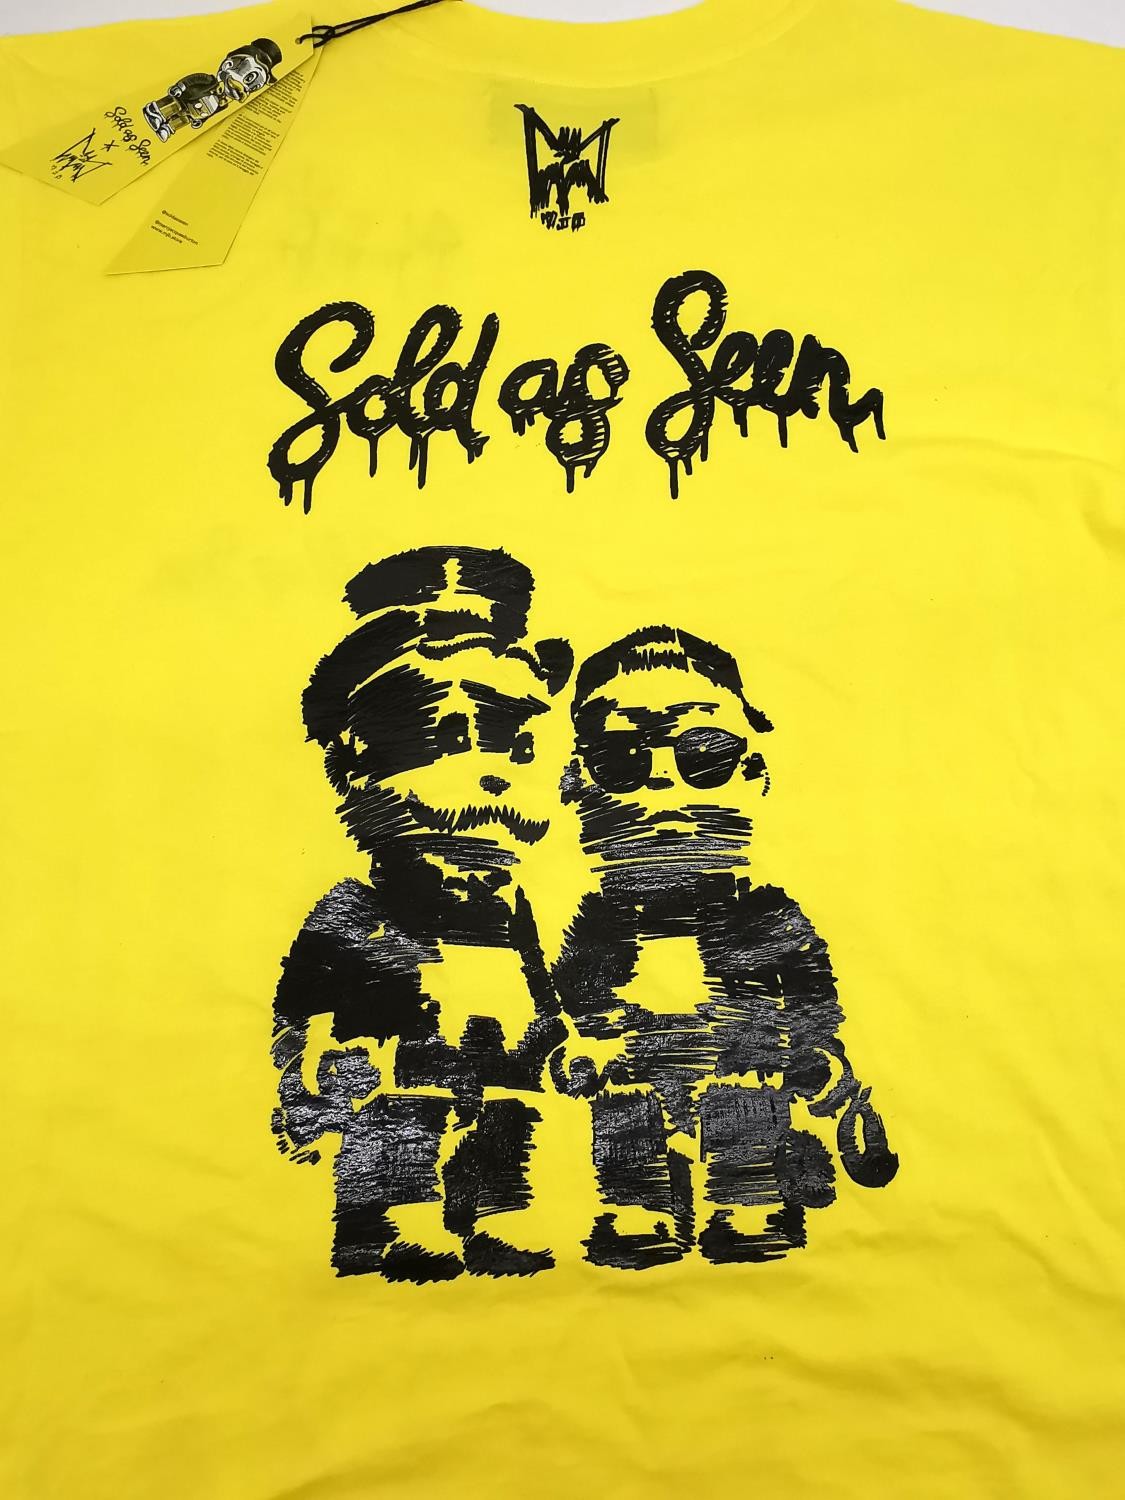 'Sold as Seen' signed T-shirt by the artist 'Alec Monopoly' size XS, measures 105cm from where the - Image 6 of 14